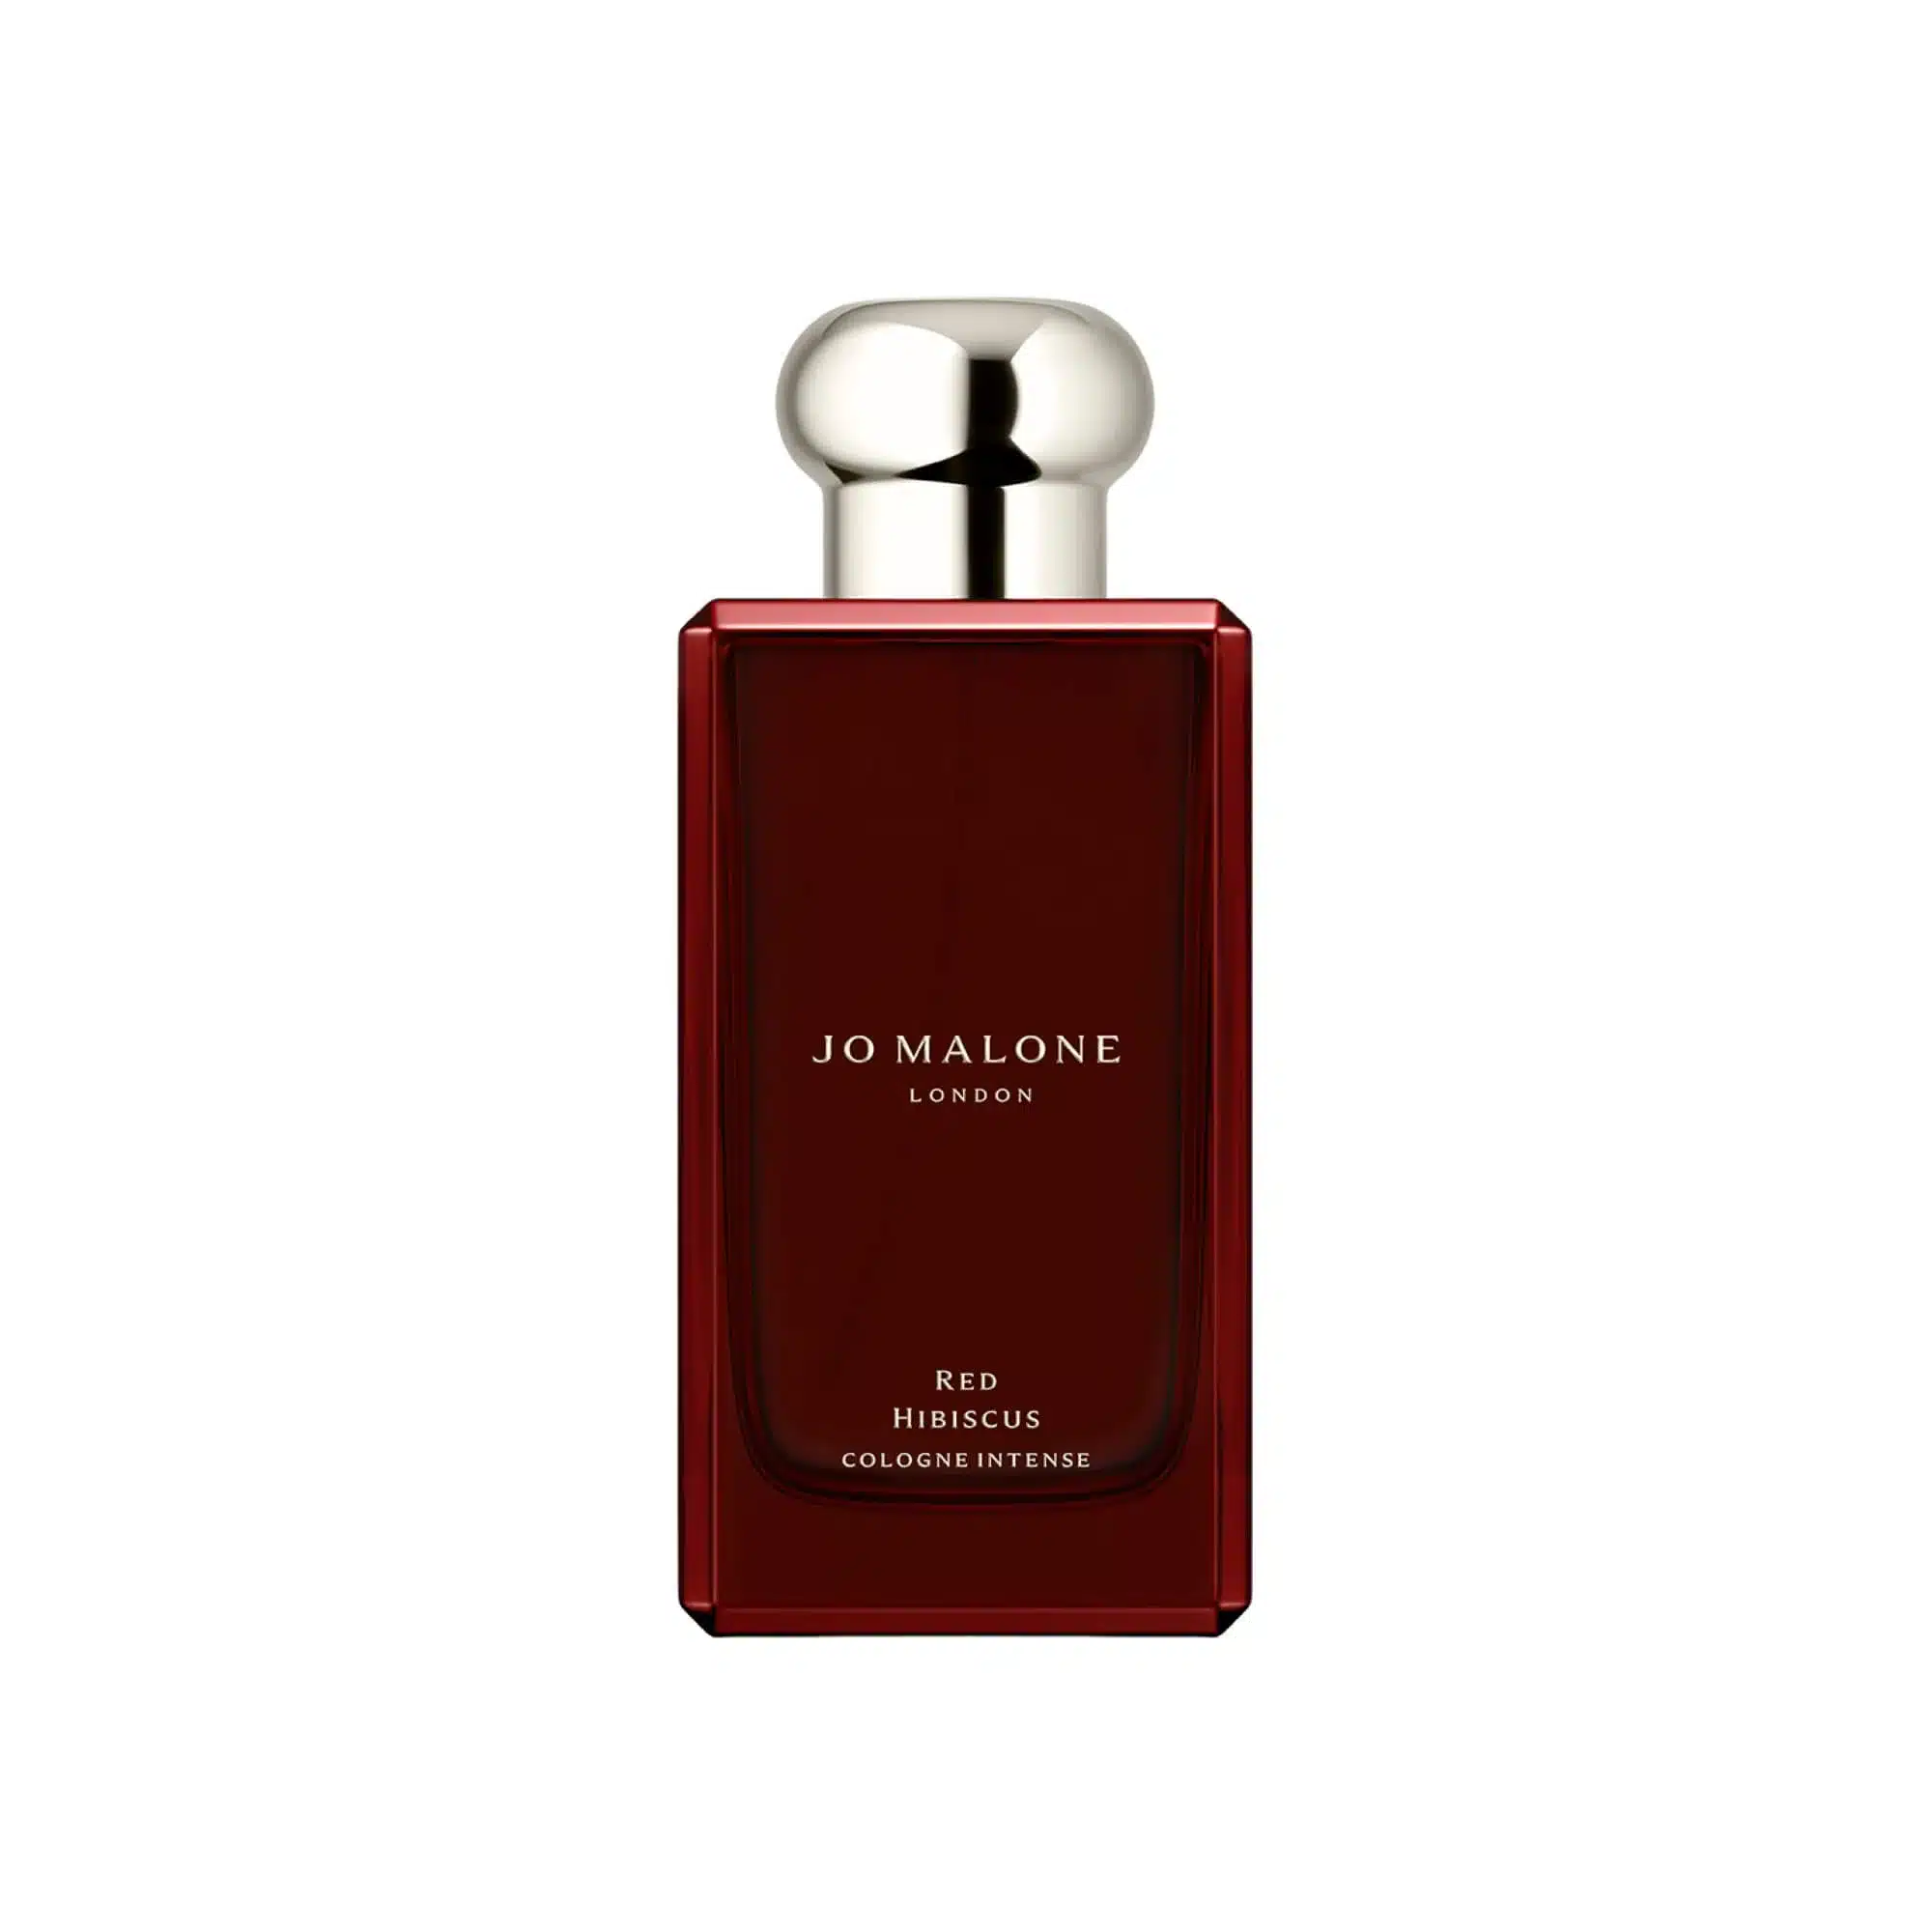 jo malone london red hibiscus cologne intense